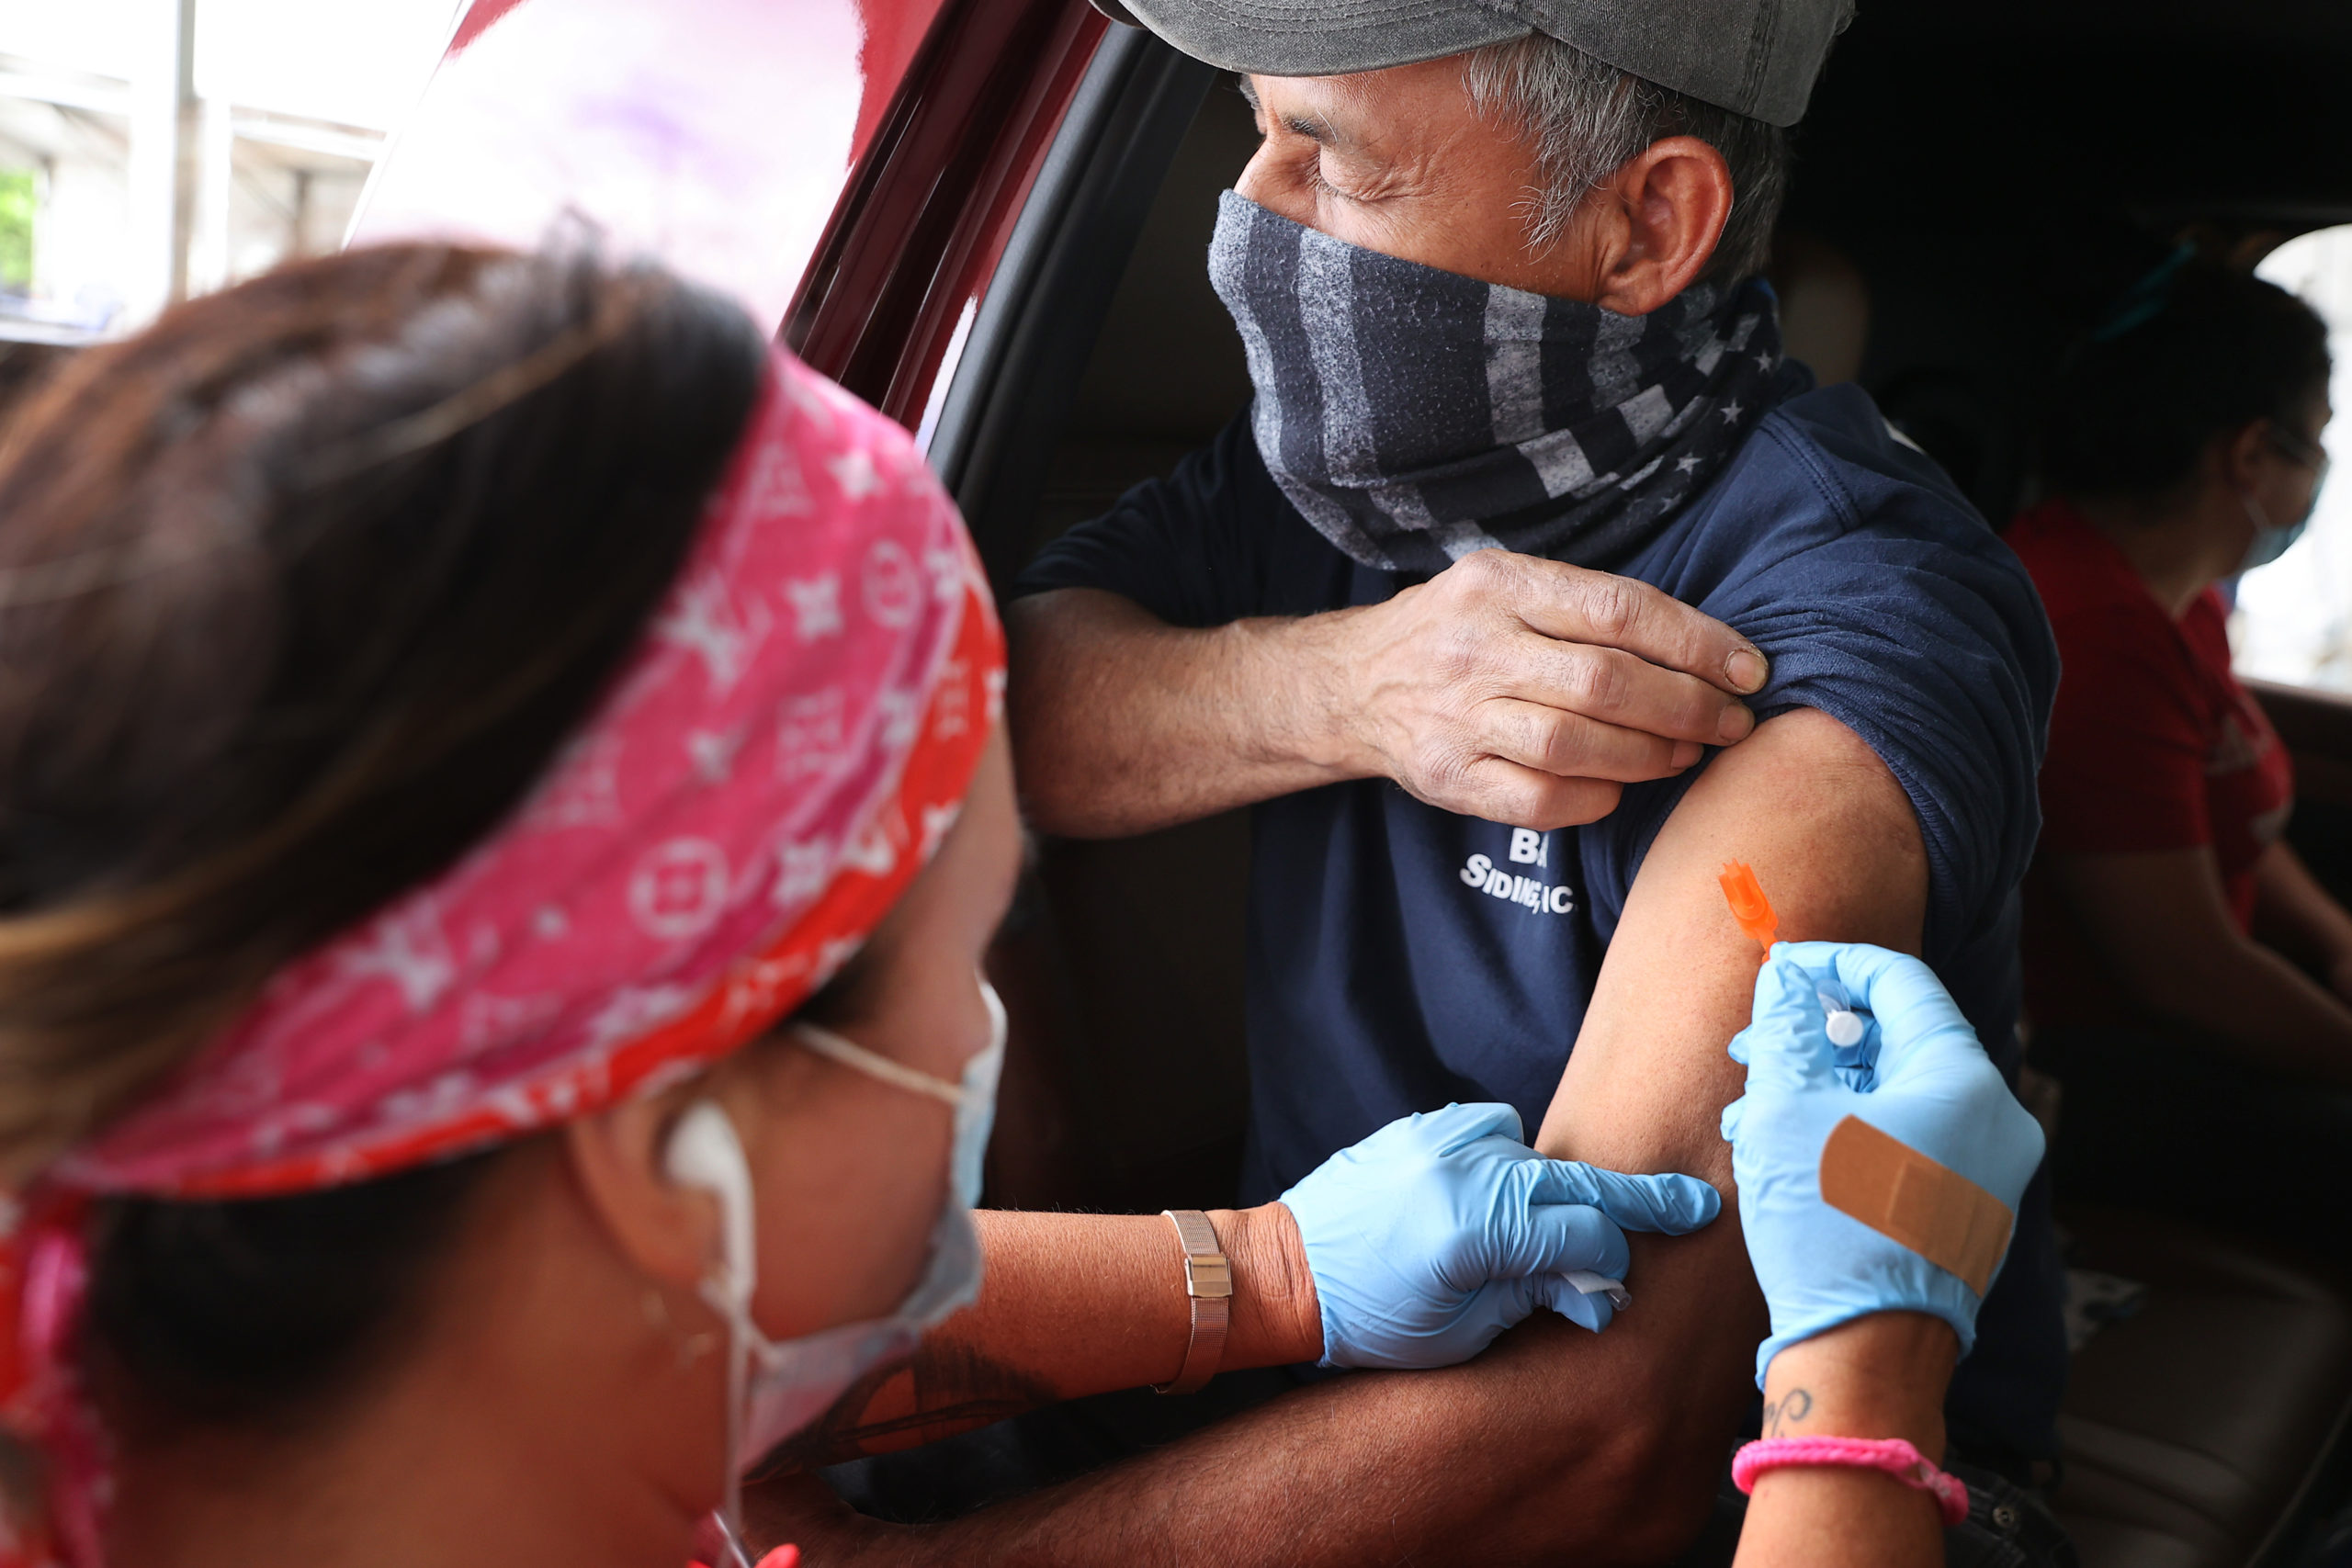 A man receives his first dose of the Pfizer vaccine on Wednesday in Aberdeen, Maryland. (Chip Somodevilla/Getty Images)